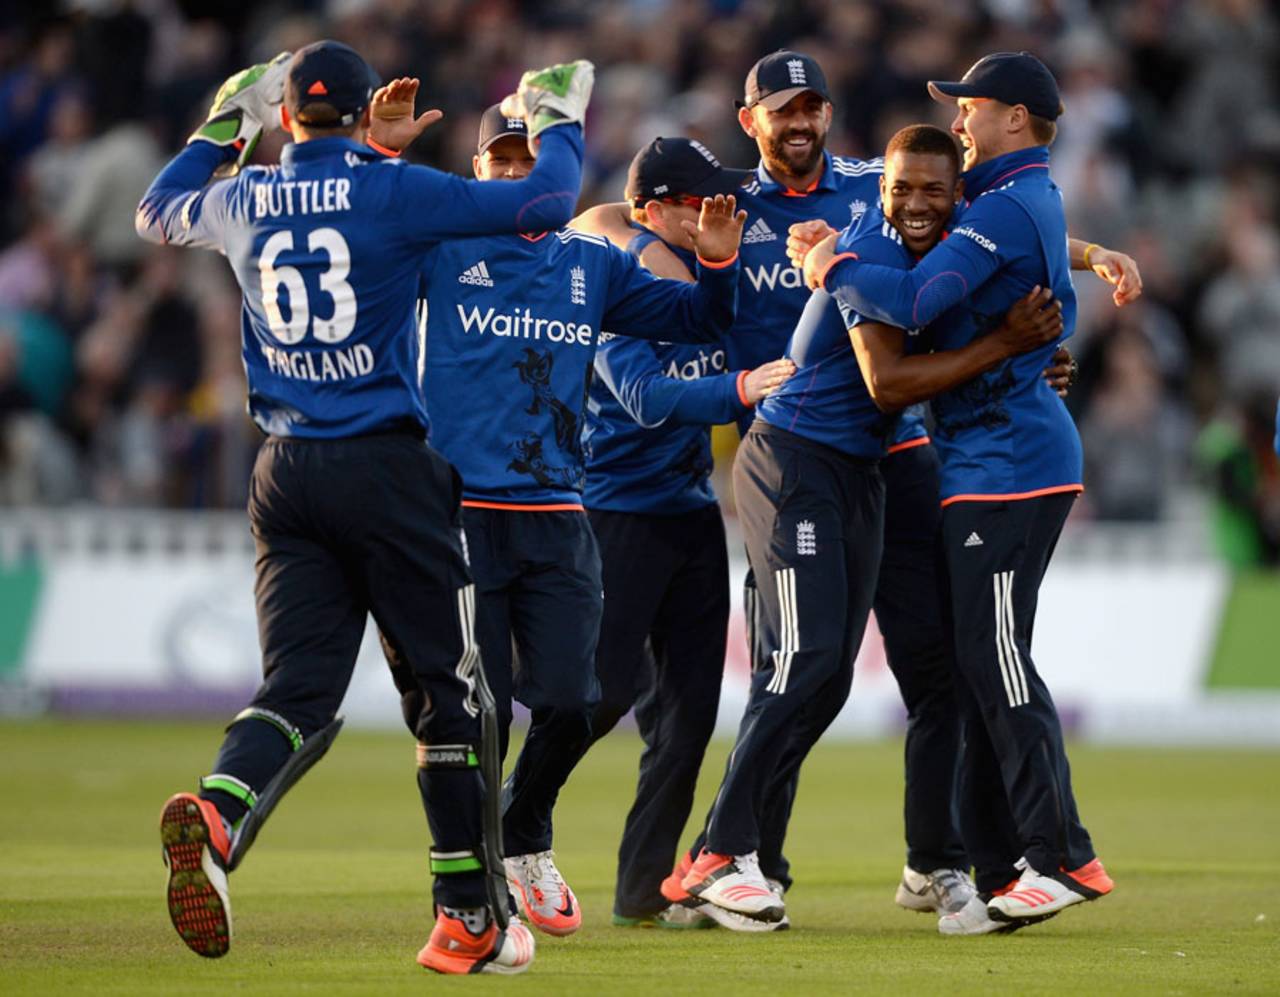 Chris Jordan picked up the final wicket as England closed out a big win, England v New Zealand, 1st ODI, Edgbaston, June 9, 2015